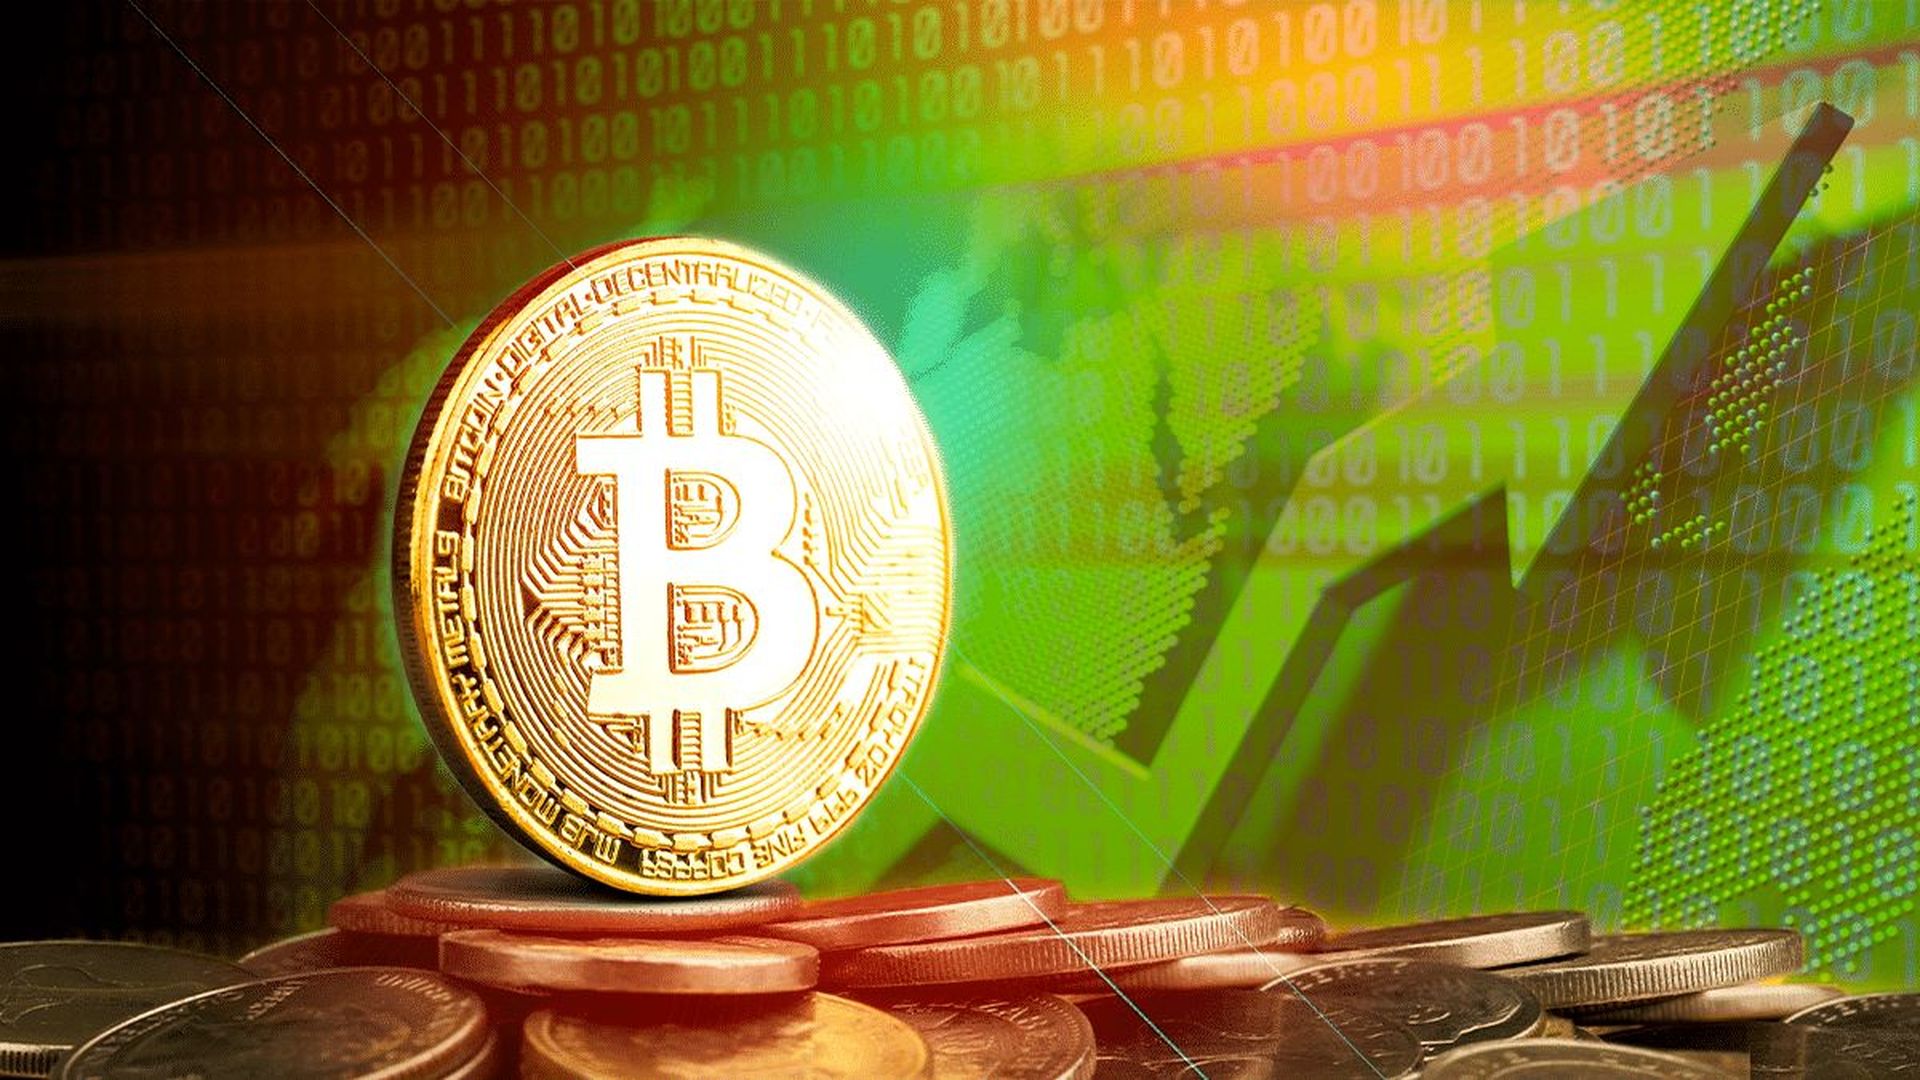 The global crypto market is experiencinga downtrend and the new Central African Republic Bitcoin law will pave the way for the country to use the popular crypto as a legal tender.